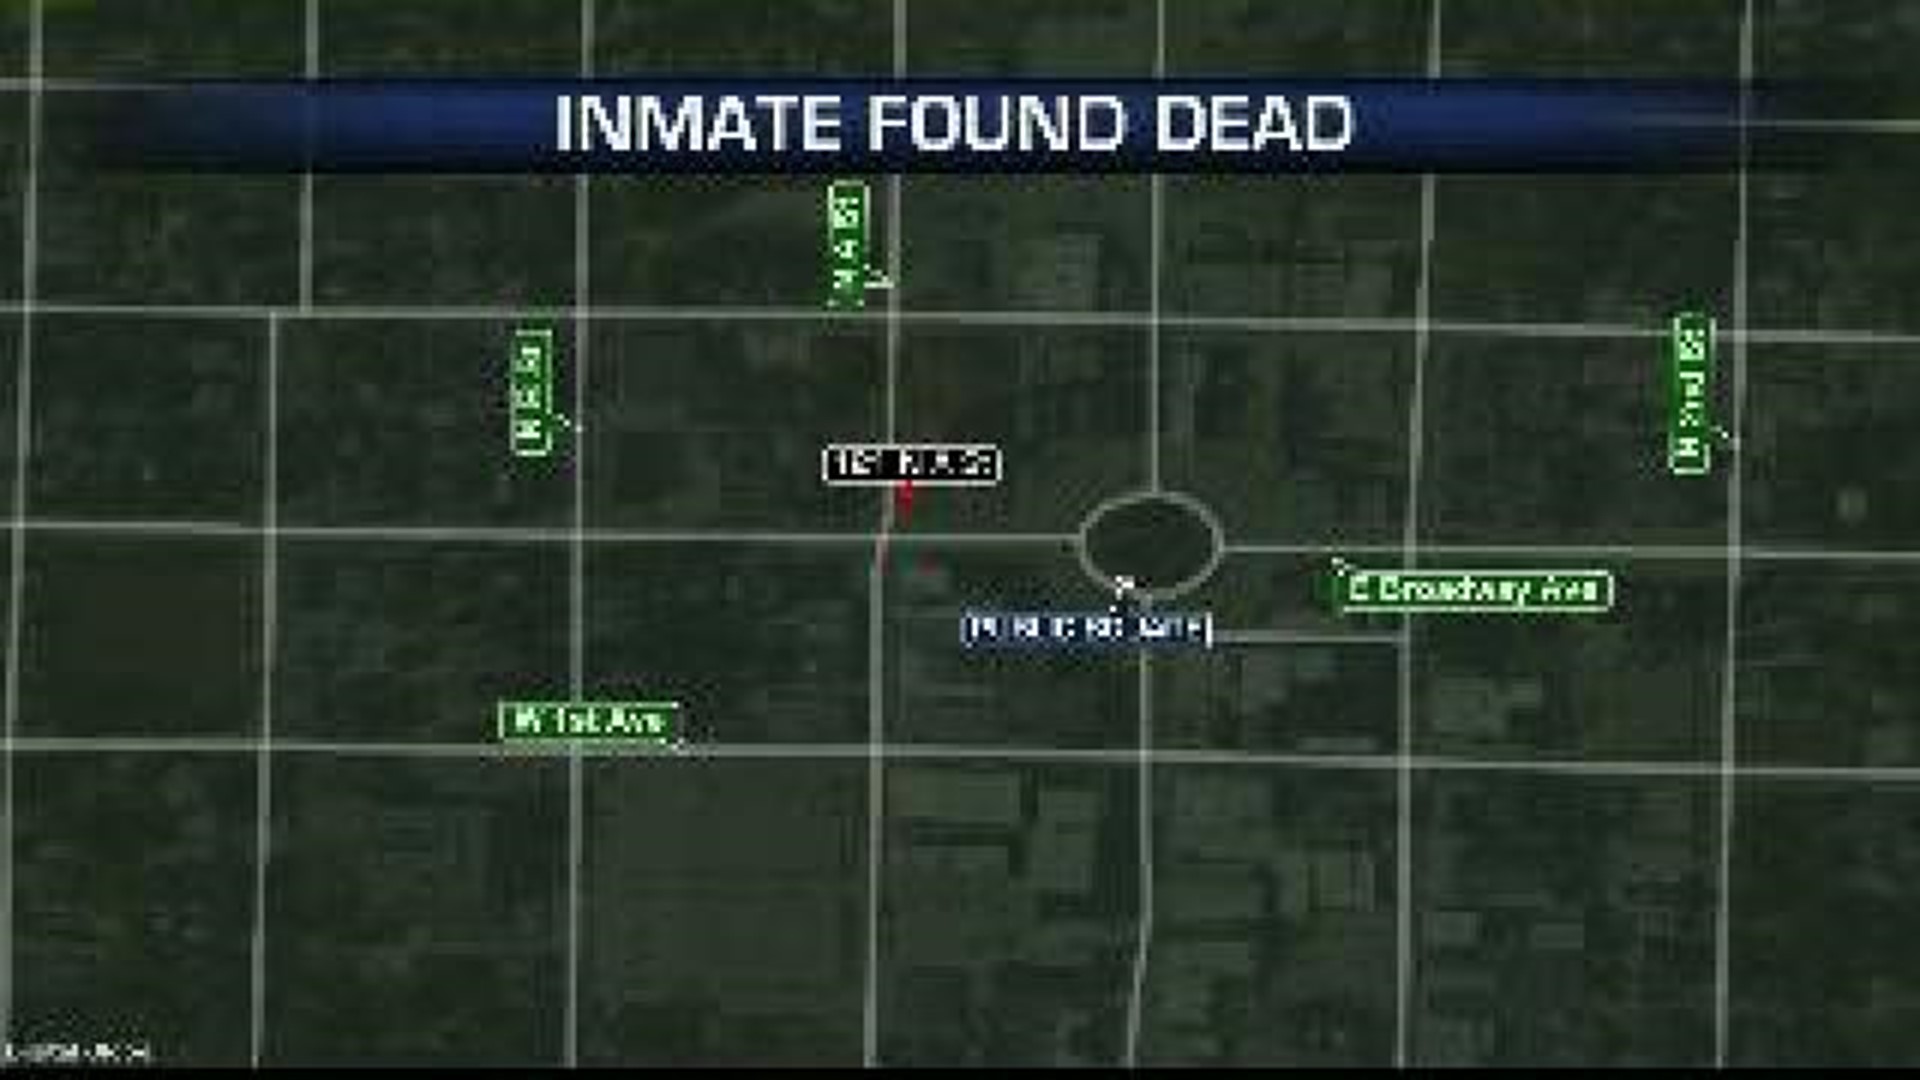 Inmate found dead